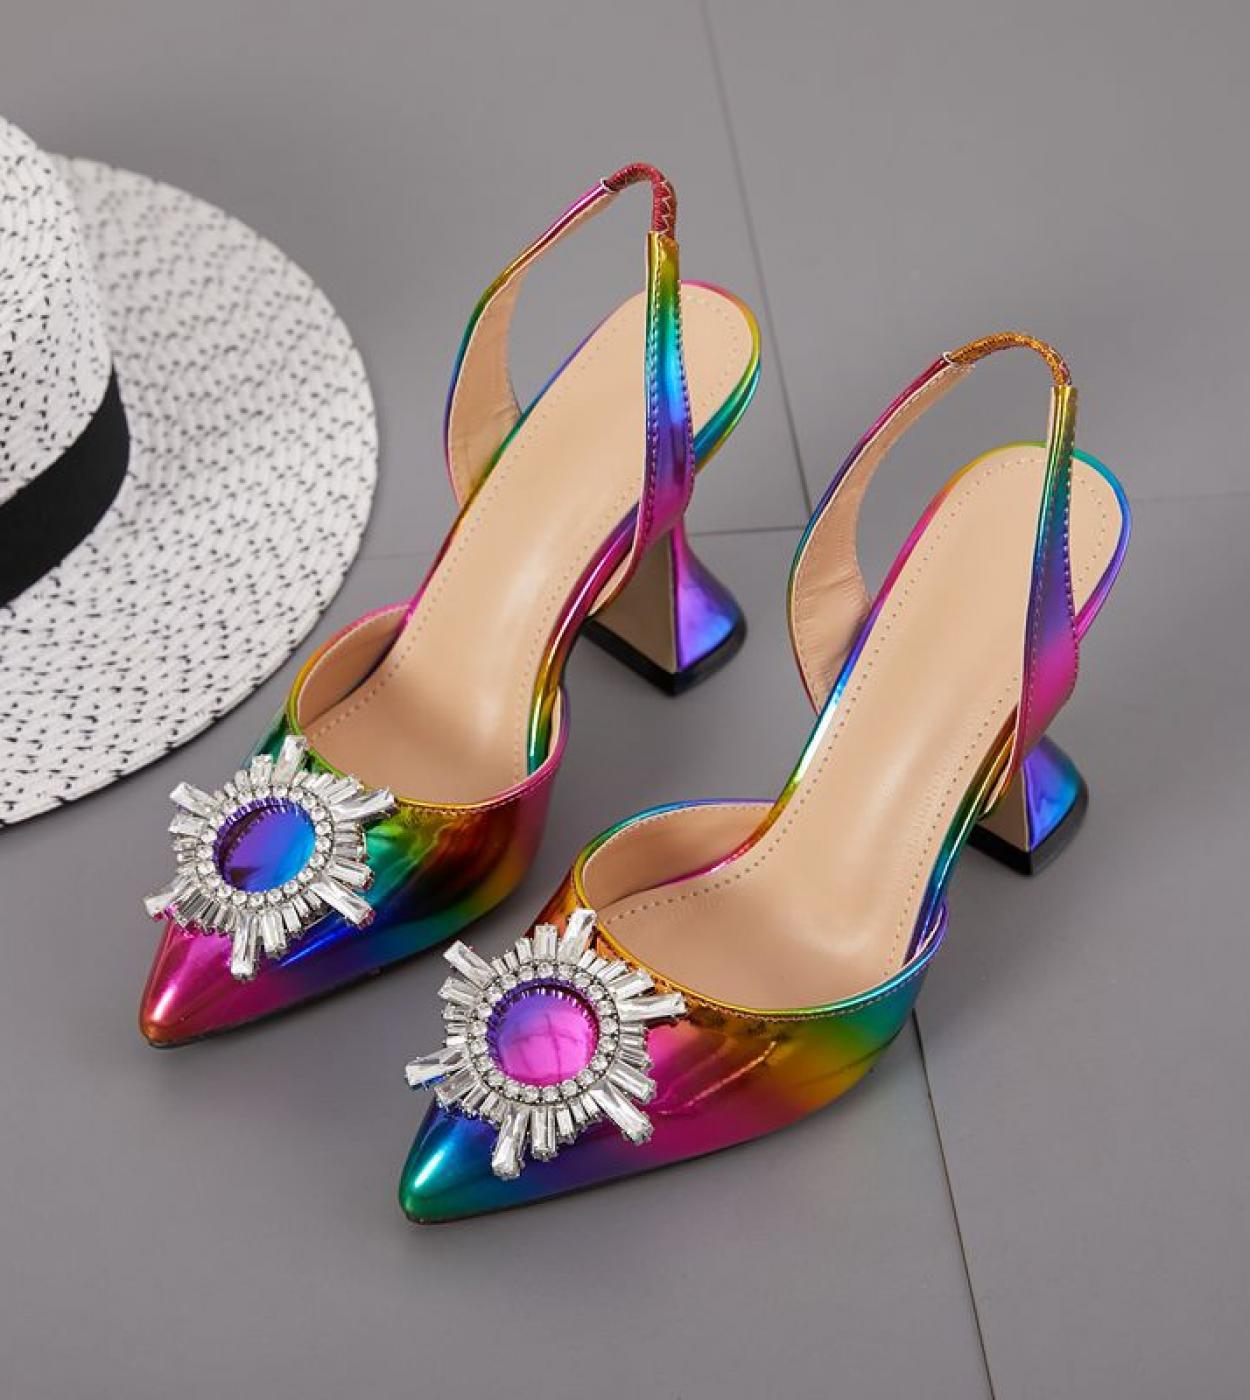 2022 New Summer Fashion Womens High Heel Sandals Pointed Toe Rhinestones Sunflower Pointed Toe Roman Party Bling  Heels